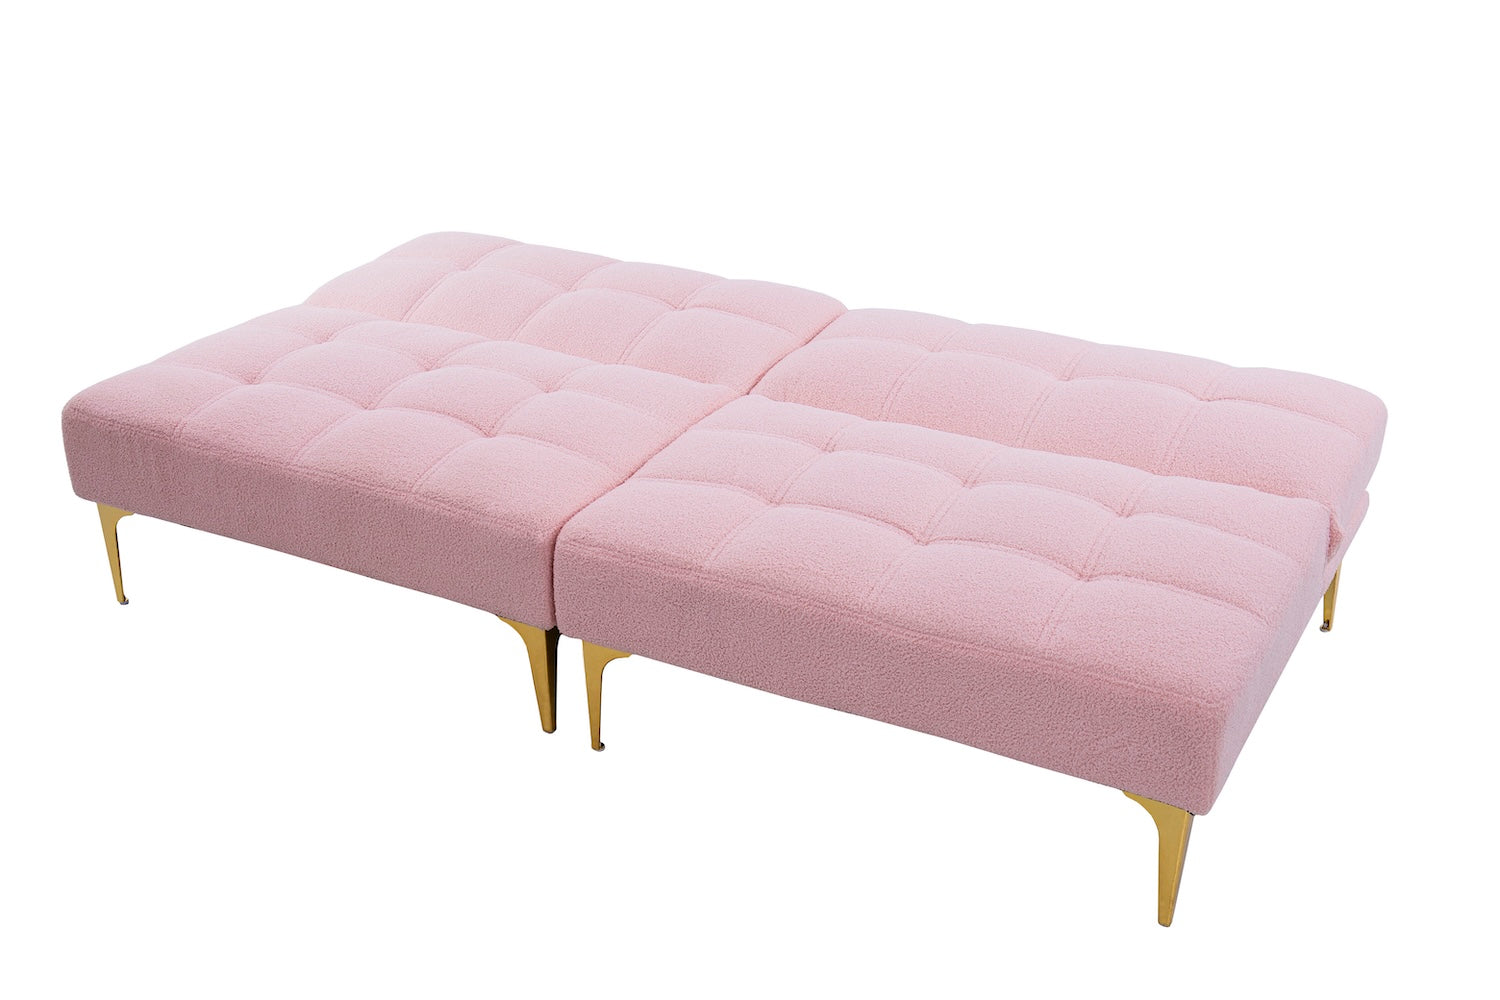 Evolve Split Back Sofa Bed with Gold Legs - Pink Teddy Fabric